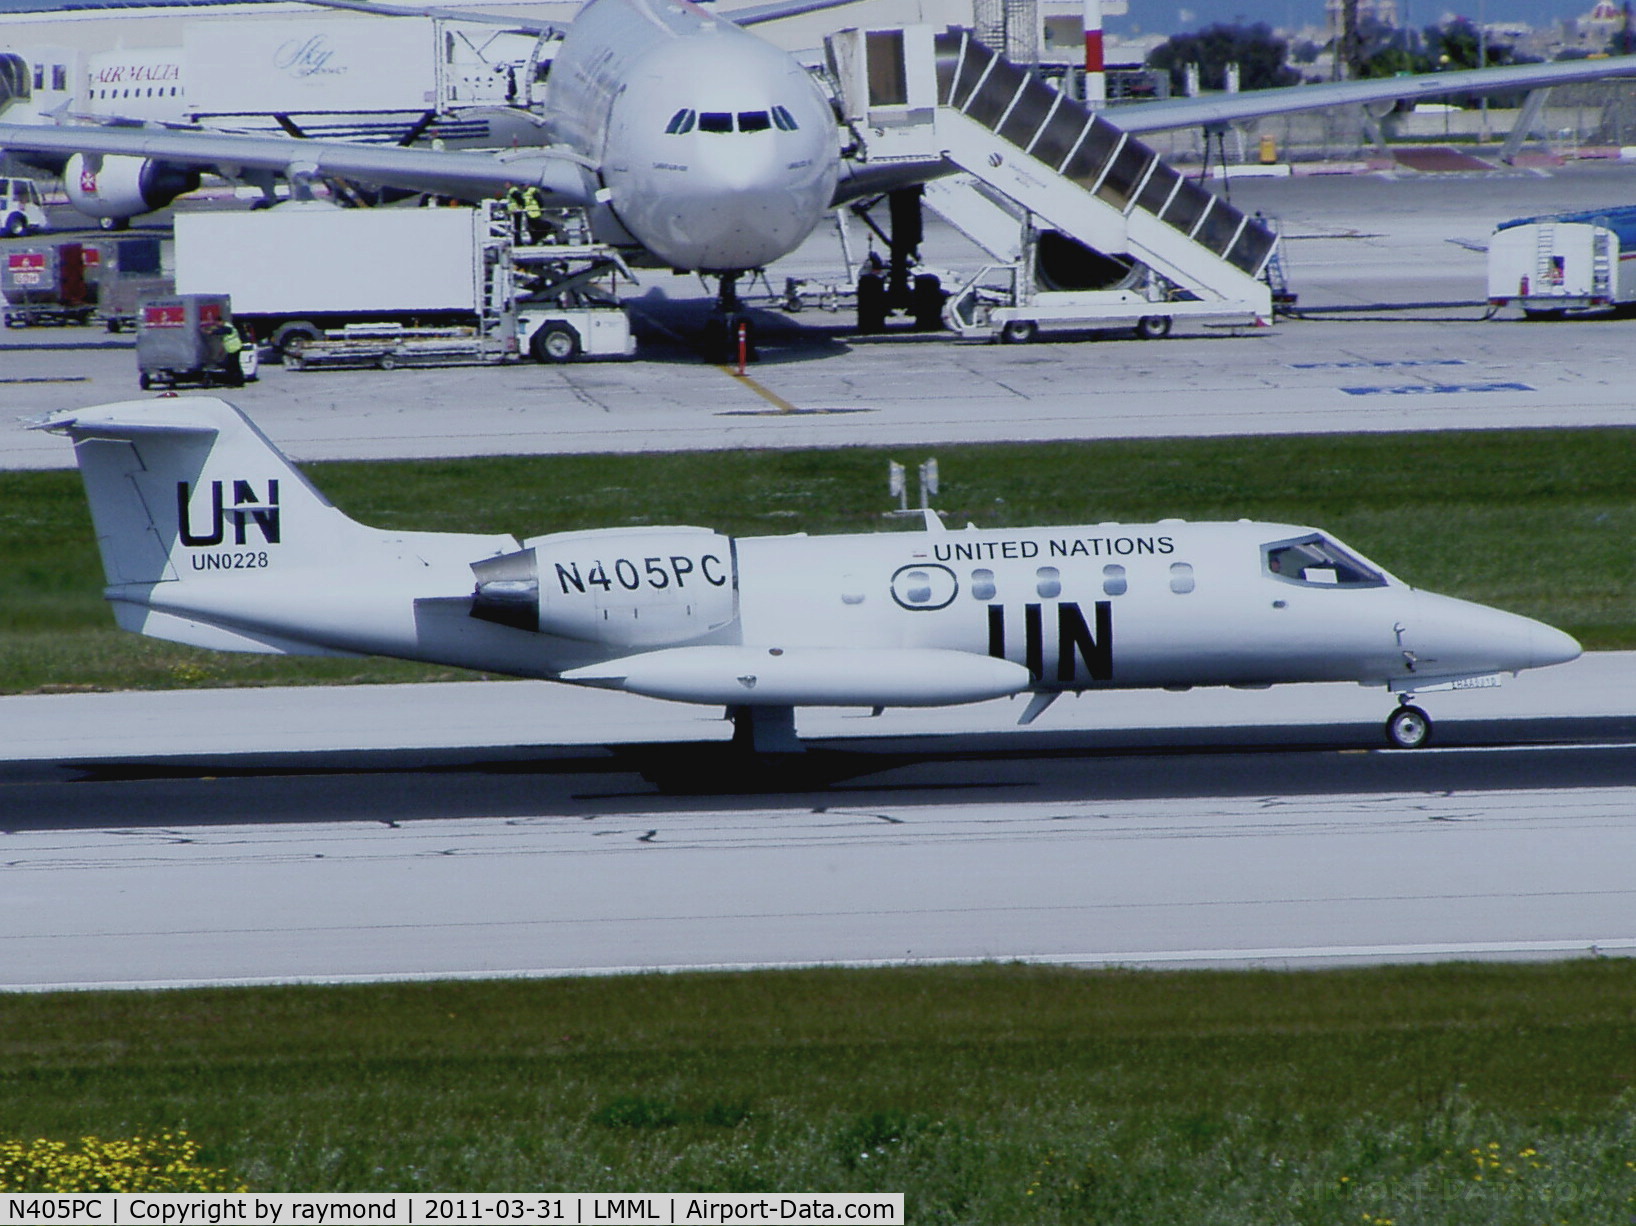 N405PC, 1989 Learjet Inc 35A C/N 651, Learjet N405PC bearing UN0228 for United Nations passed through Malta in connection with the Libyan conflict.